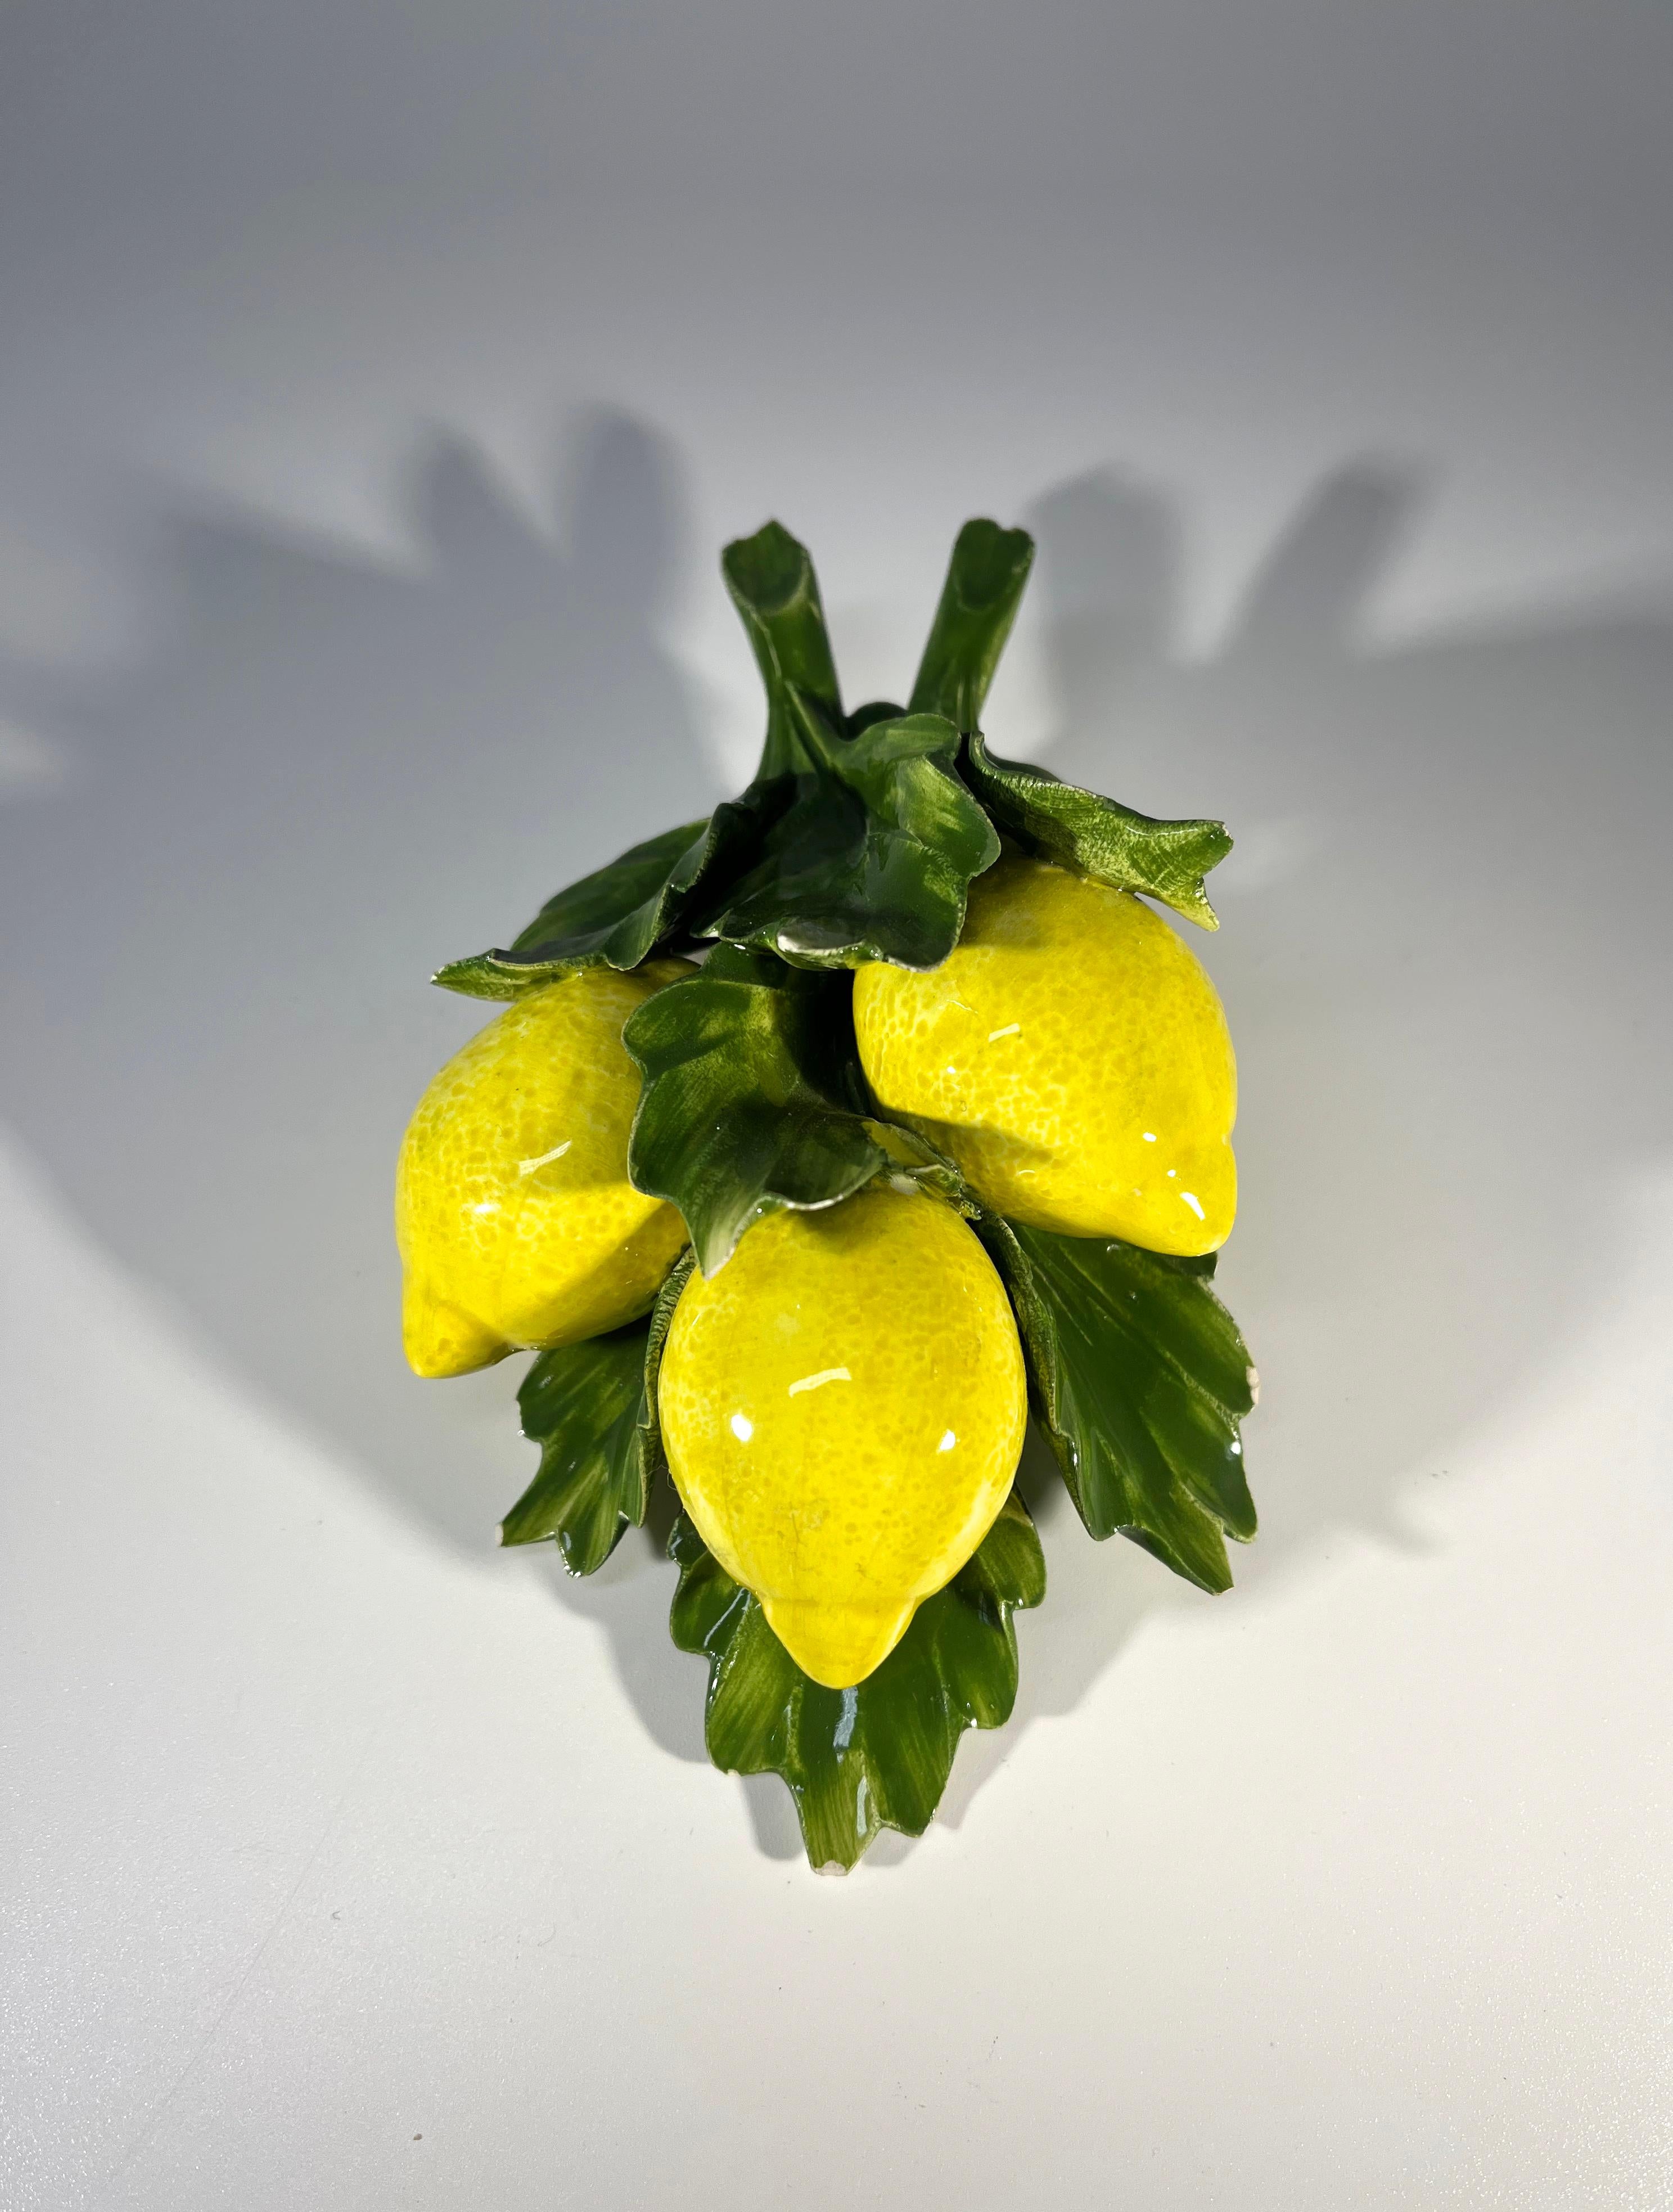 Petite trio of bright citron yellow lemons by Capodimonte L'Atelier, Italy
Fragile and delicately created Italian porcelain decor
Circa 1970's
Signed Capodimonte L'Atelier N
Height 1.5 inch, Width 3 inch, Depth 5.5 inch
In very good condition. Minor